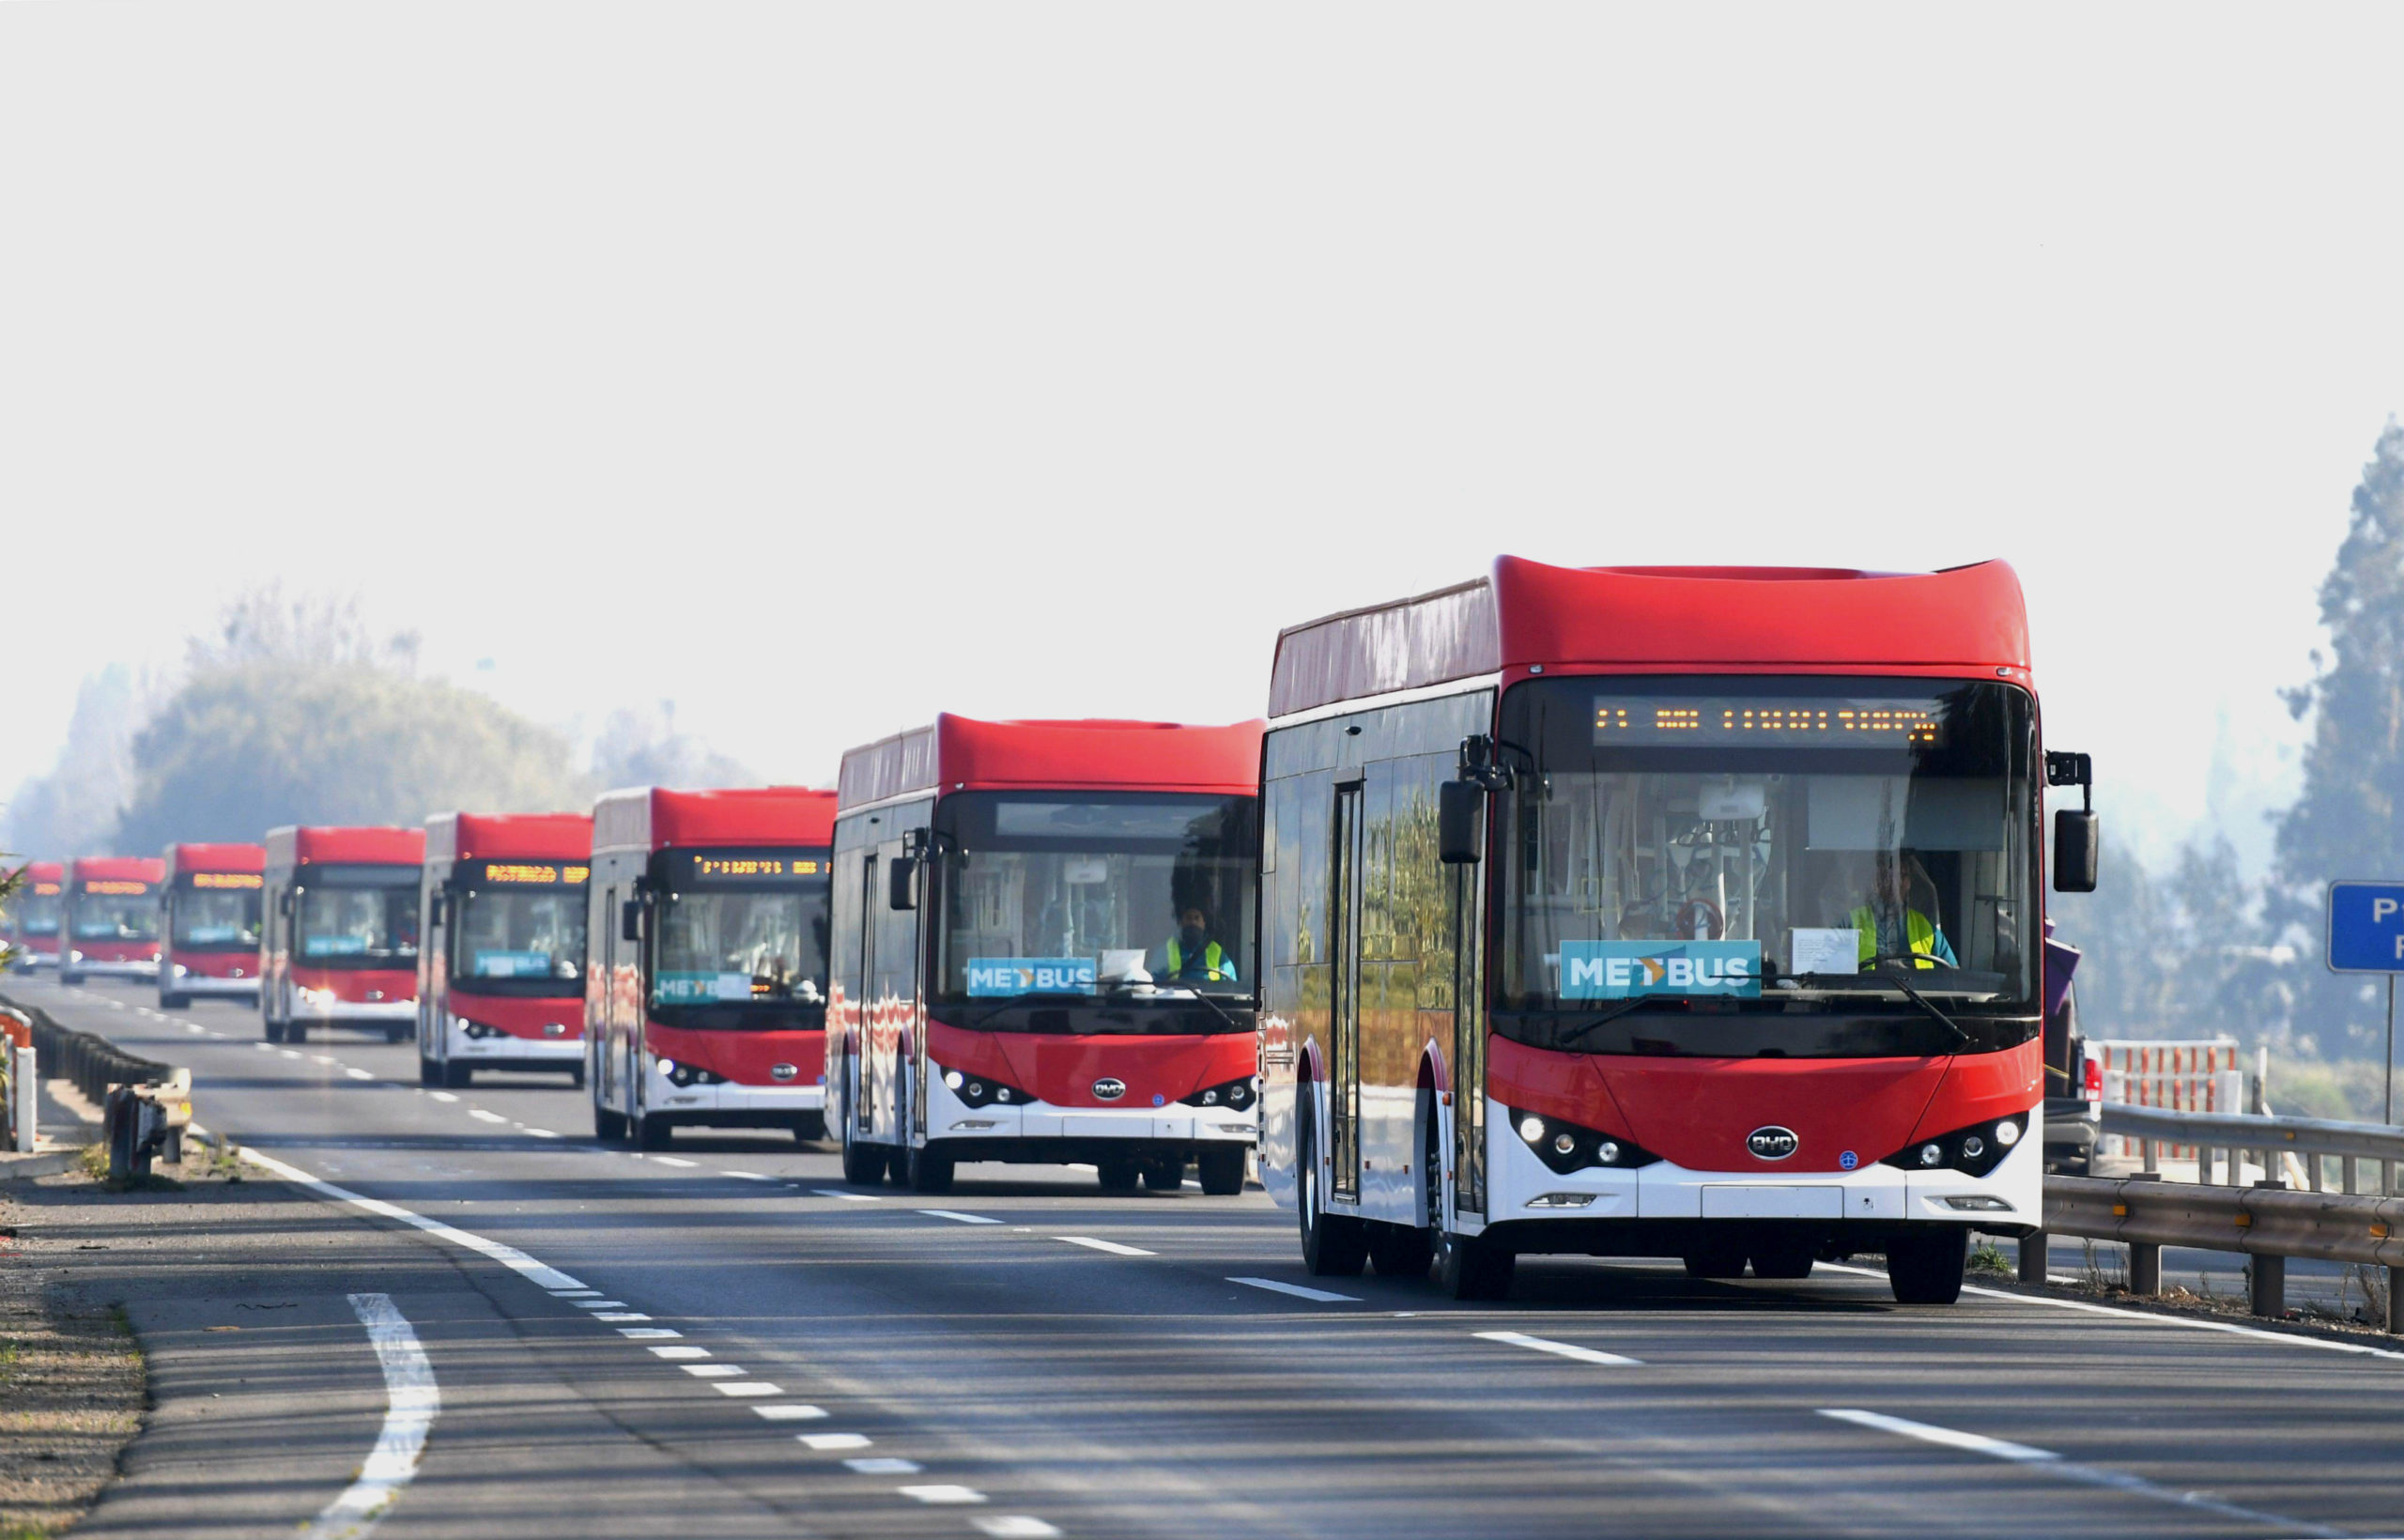 Chinese electric buses roll out across Latin America - China Dialogue